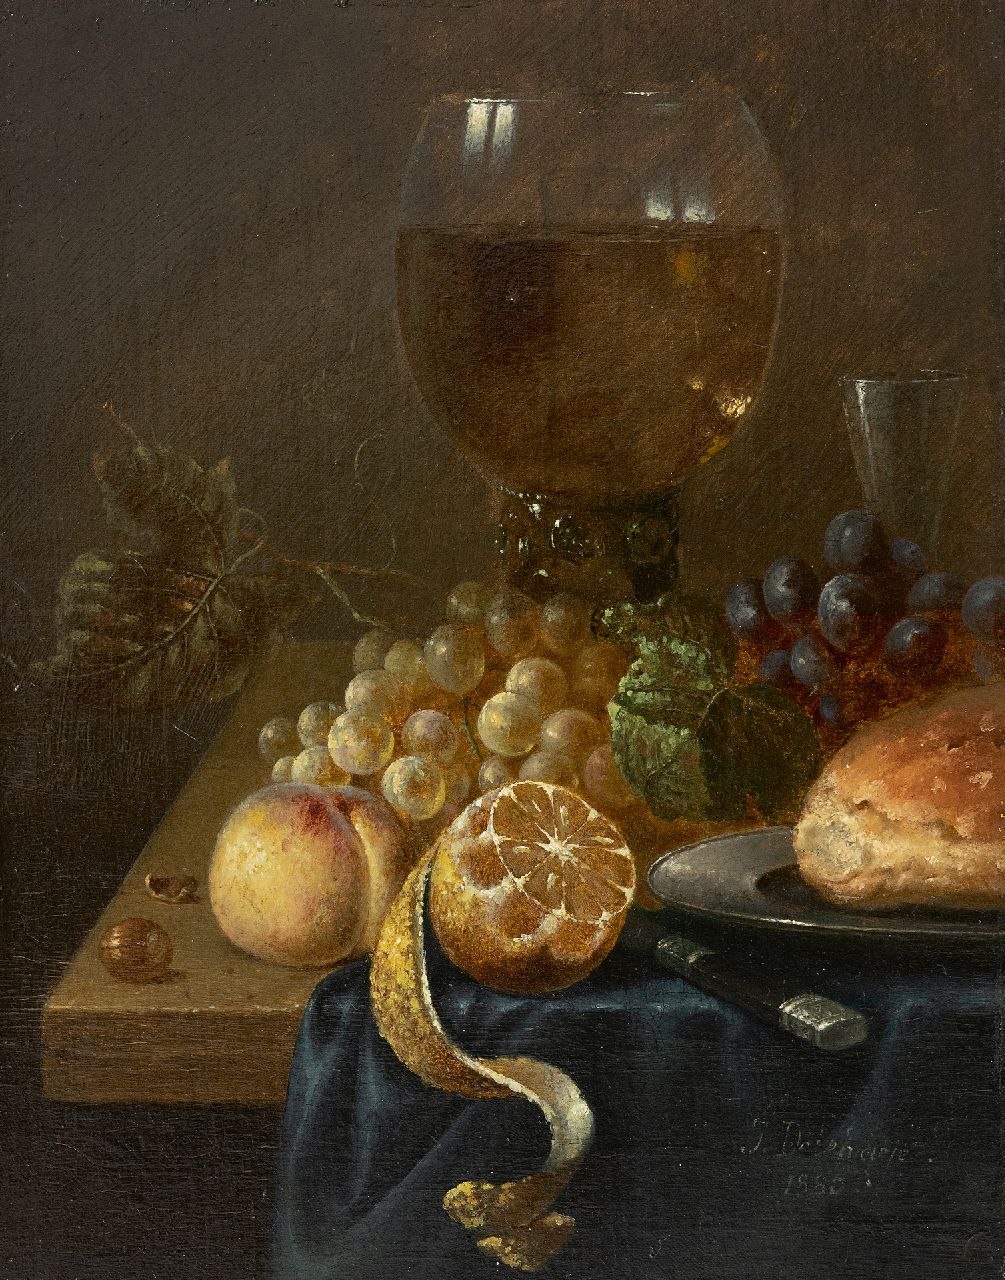 Jos Delehaye | Still life with Roemer, gtrapes, lemon and pewter dish, oil on canvas, 26.9 x 21.2 cm, signed l.r. and dated 1880